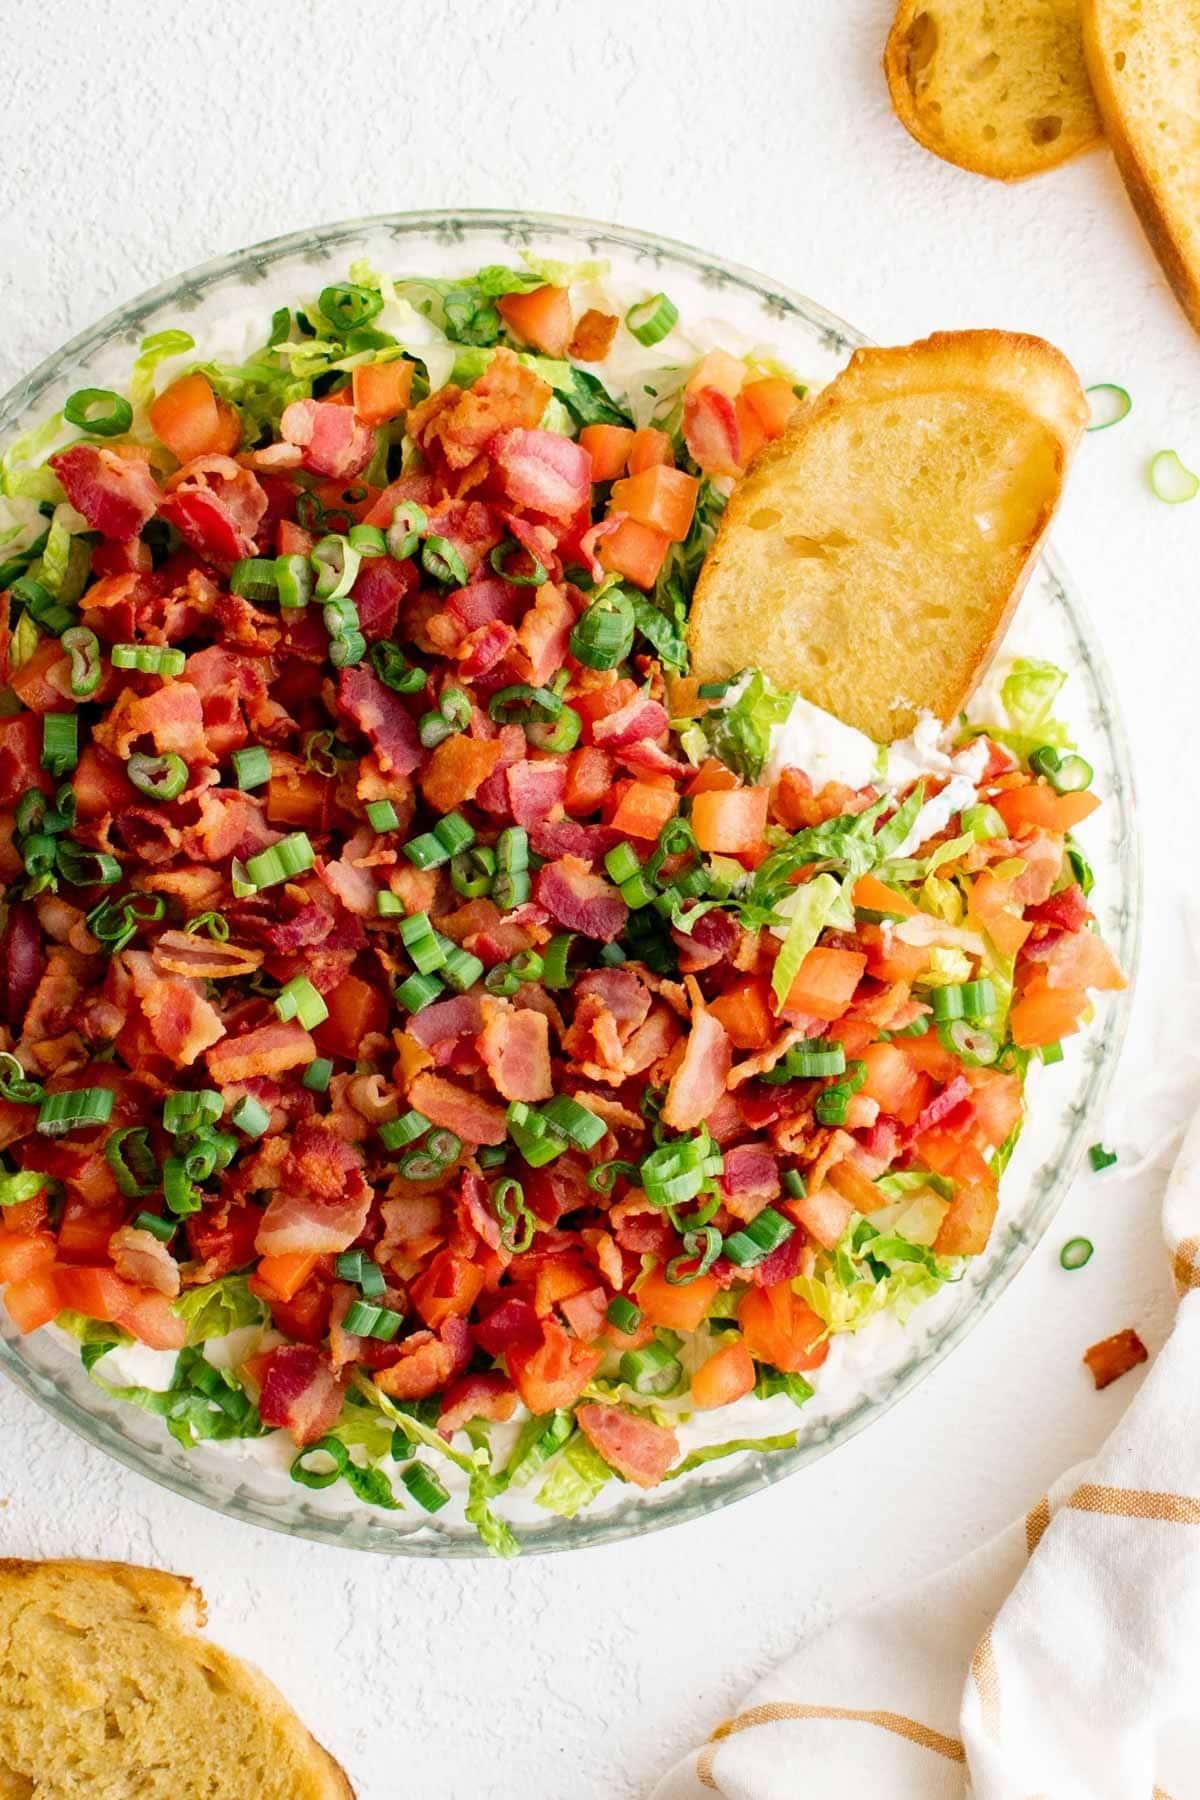 Clear glass pie plate with creamy base, lettuce, tomatoes, bacon and green onions.